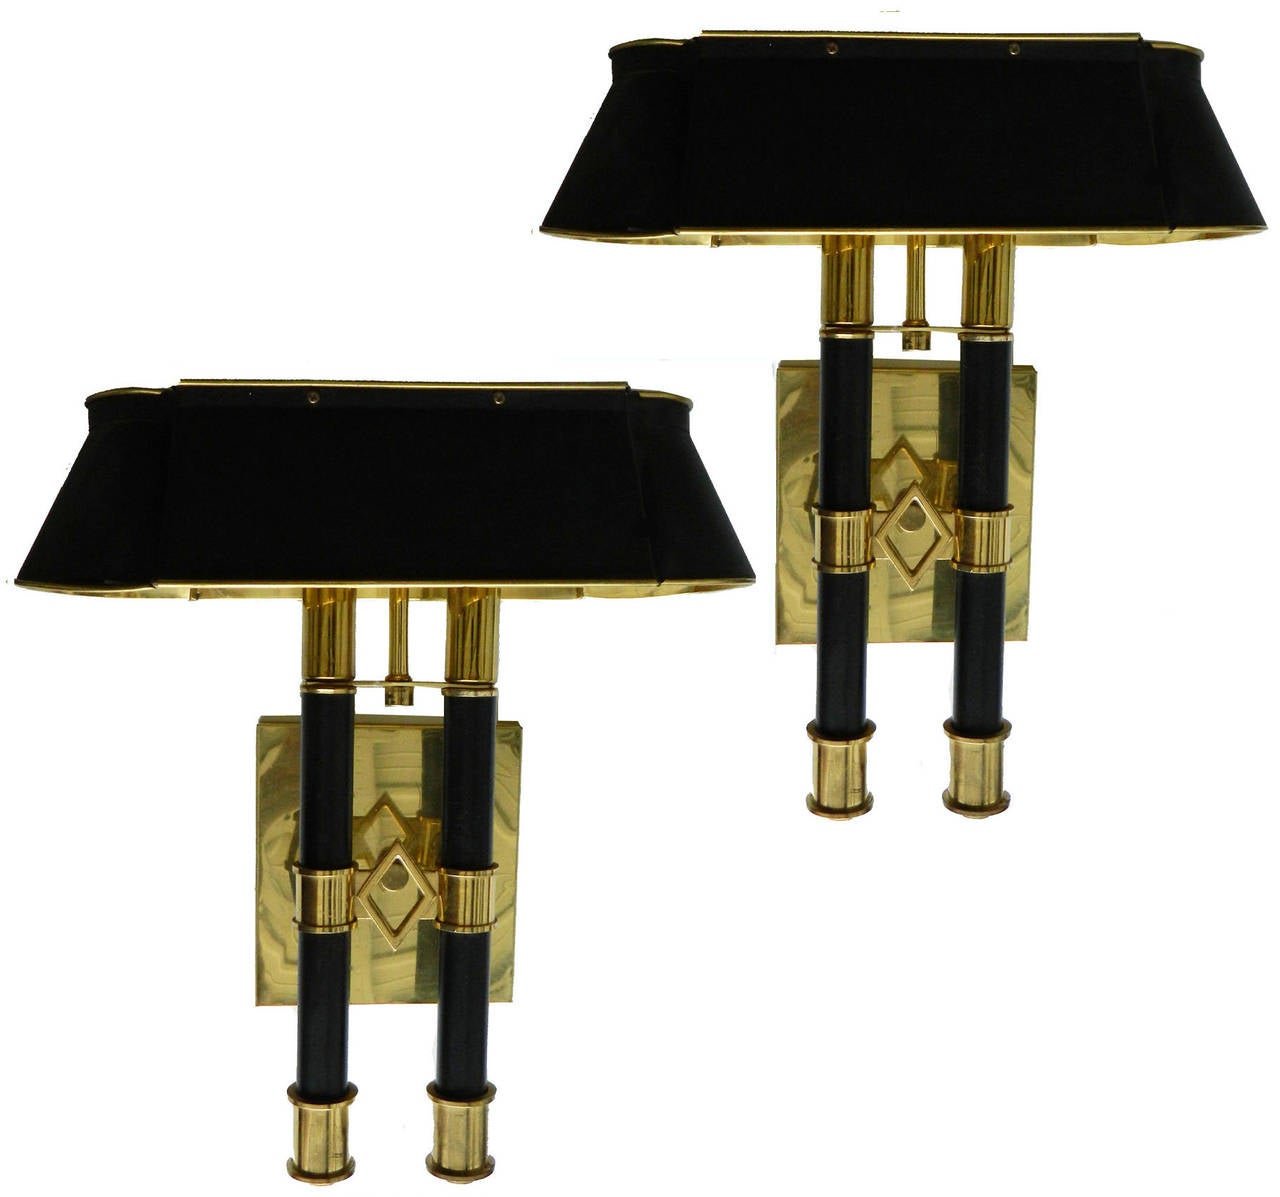  Exceptional pair of Maison Jansen Bouillotte sconces, polished brass and black paint, two lights, 75 watts max each.
US wired and working condition.
Original patina.
Back plate: 6